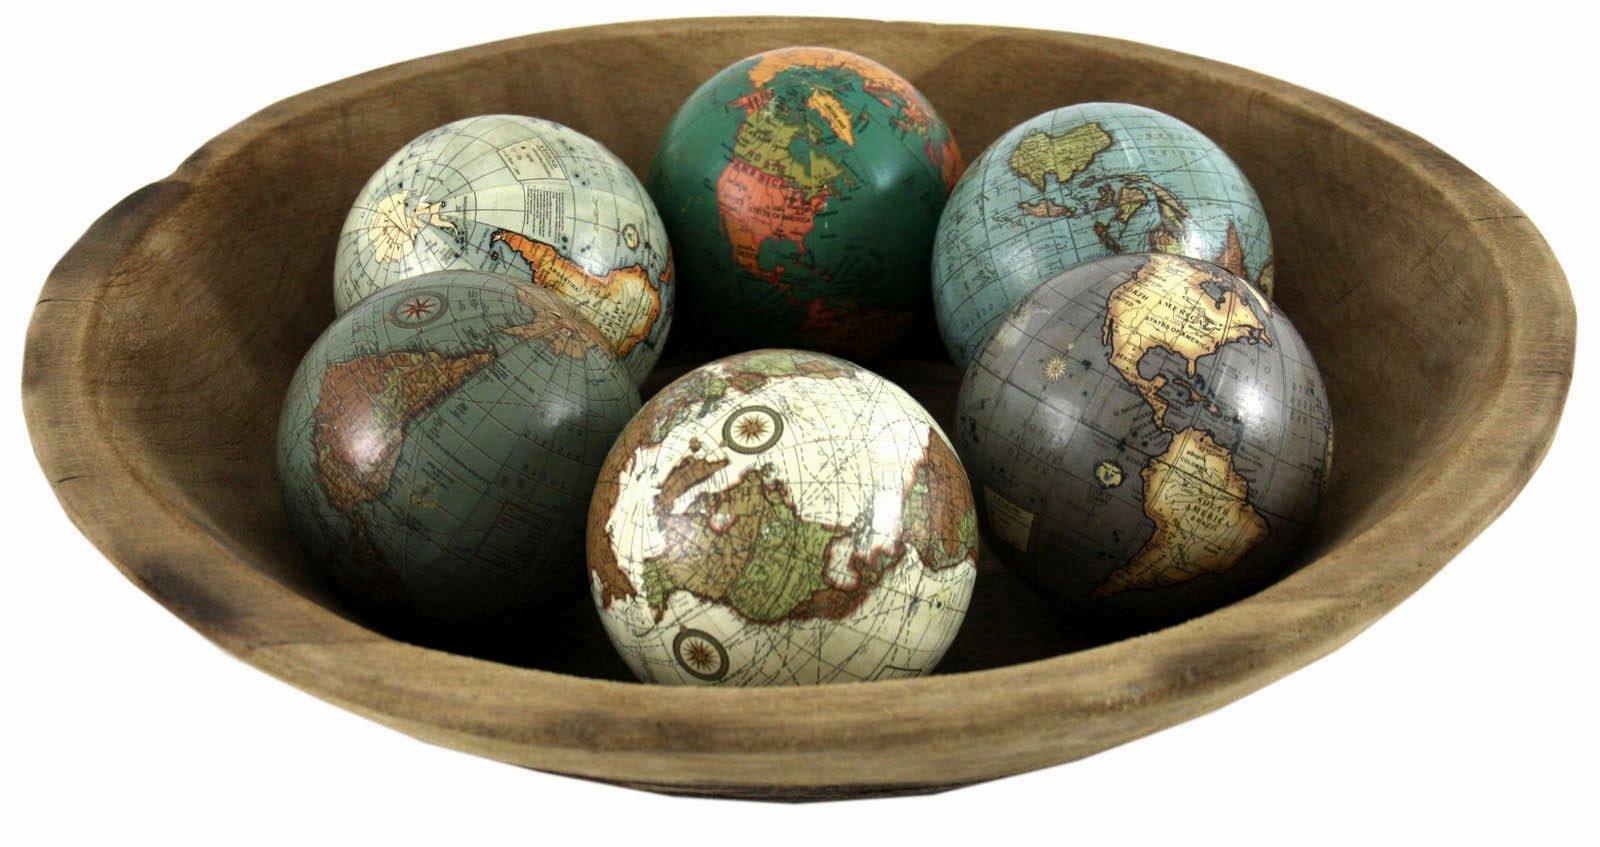 View Set of 6 x 3 Inch Decorative Globes In Assorted Colours information